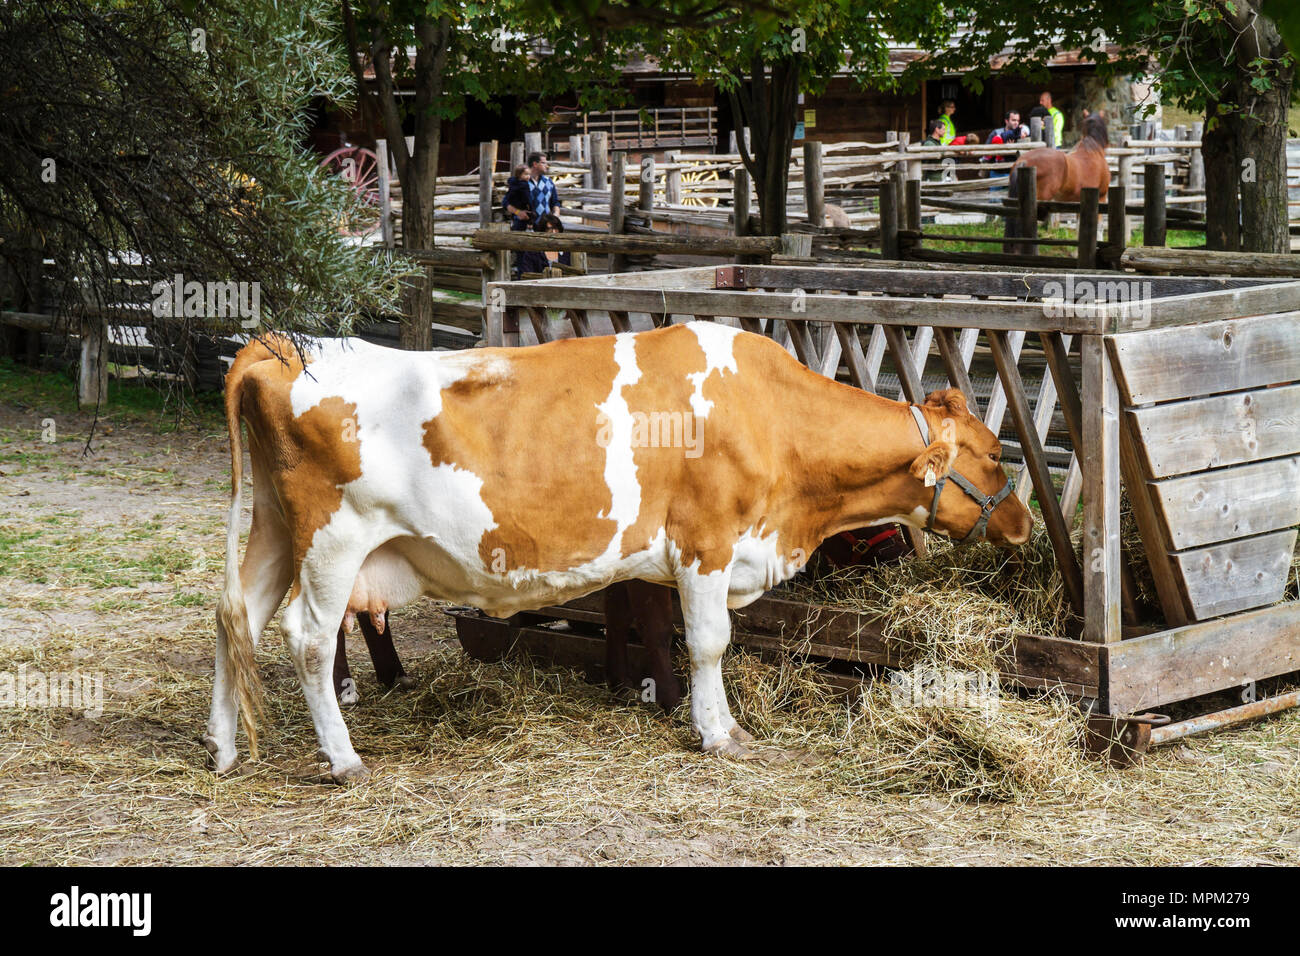 Toronto Canada,River waterdale Farm,urban farm,dairy cow,Guernsey,livestock ,breed,agriculture,animal husbandry,free attraction,feed bunk,rural life,vi  Stock Photo - Alamy